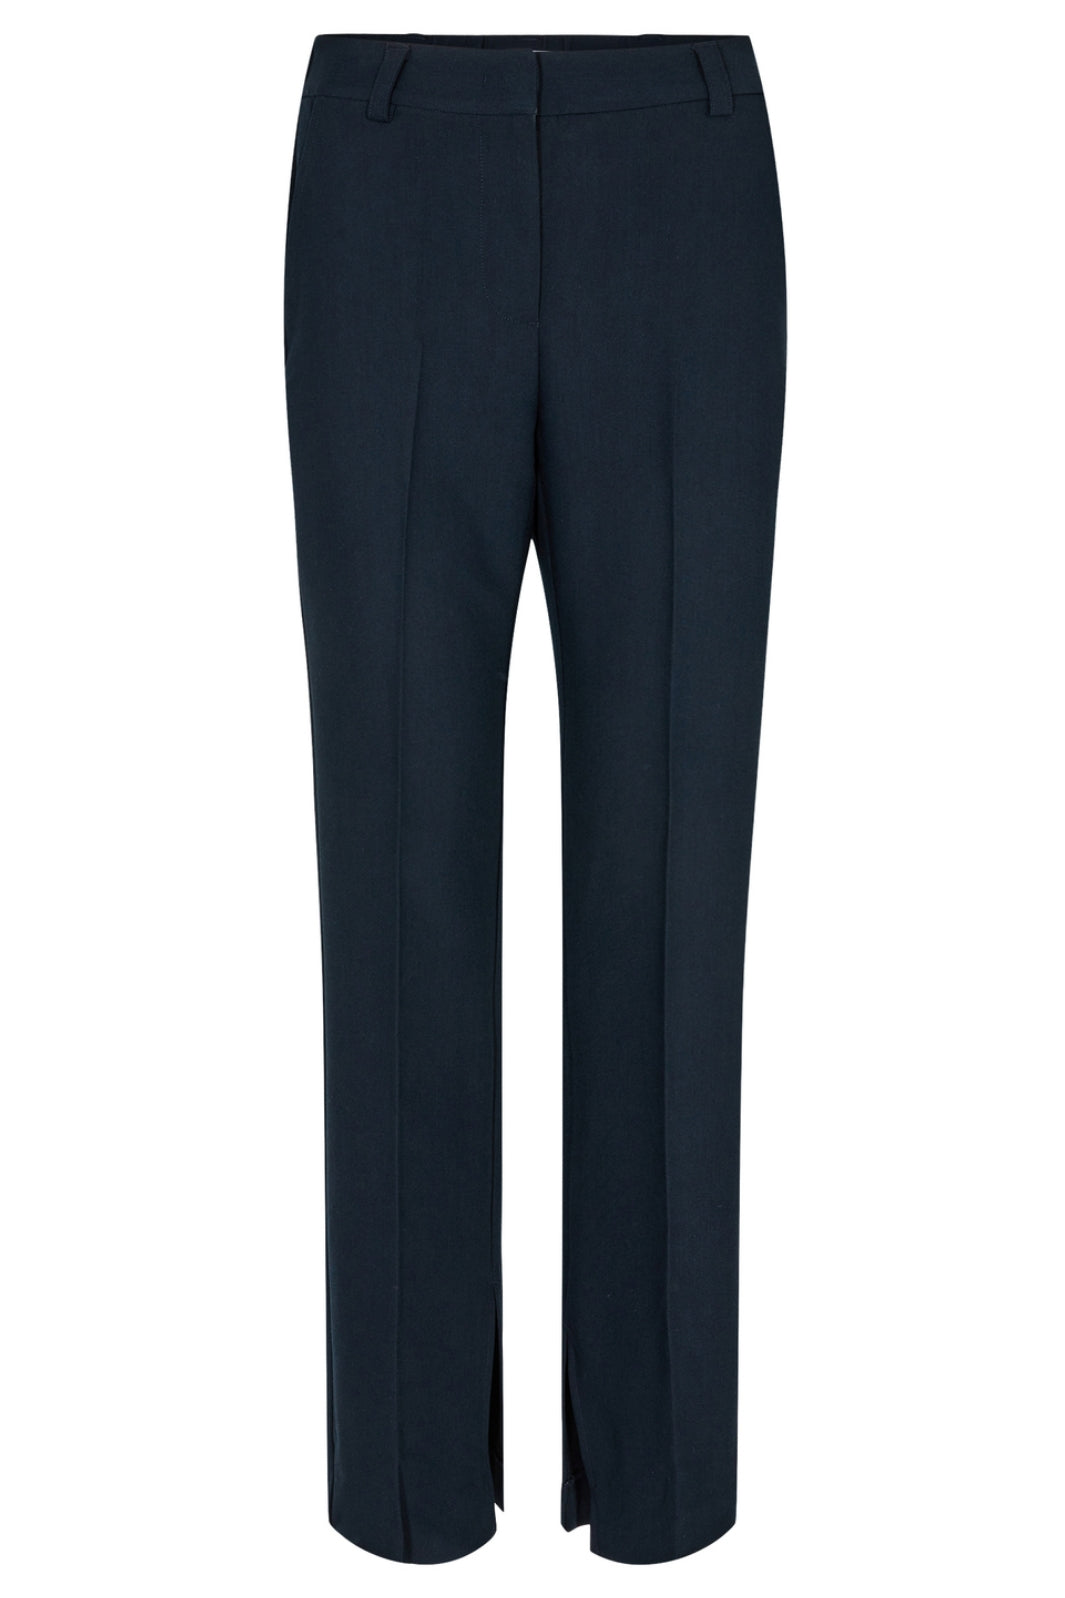 Co´couture - Vola Slit Pant - Navy Bukser 